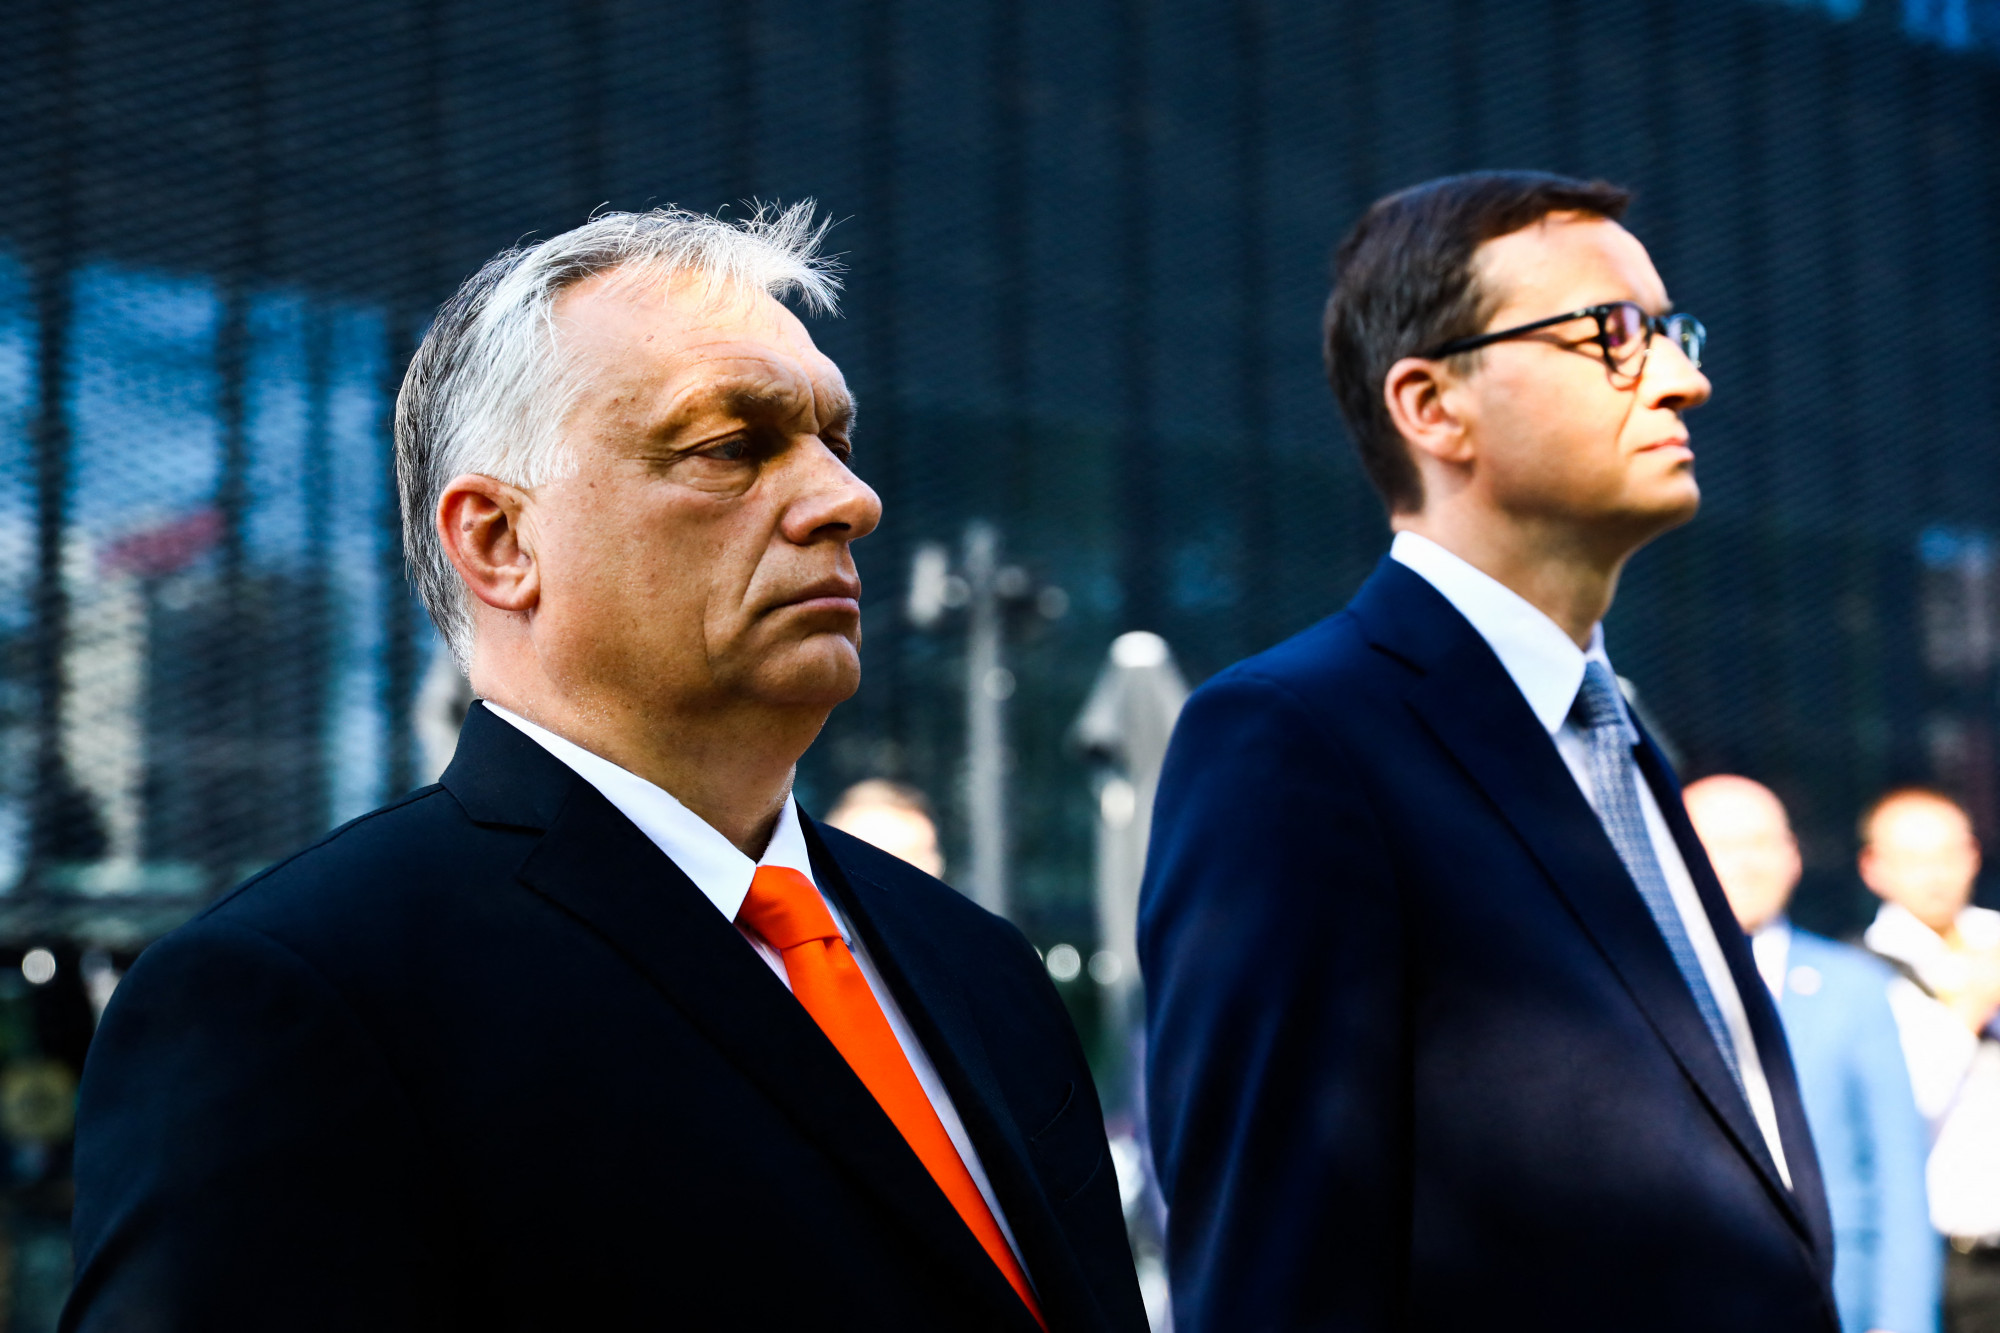 Hungary's Prime Minister Viktor Orbán (b) and Poland's Prime Minister Mateusz Morawiecki (j) at the June 2021 V4 summit in Katowice At the time, Hungarian-Polish relations were still calm.